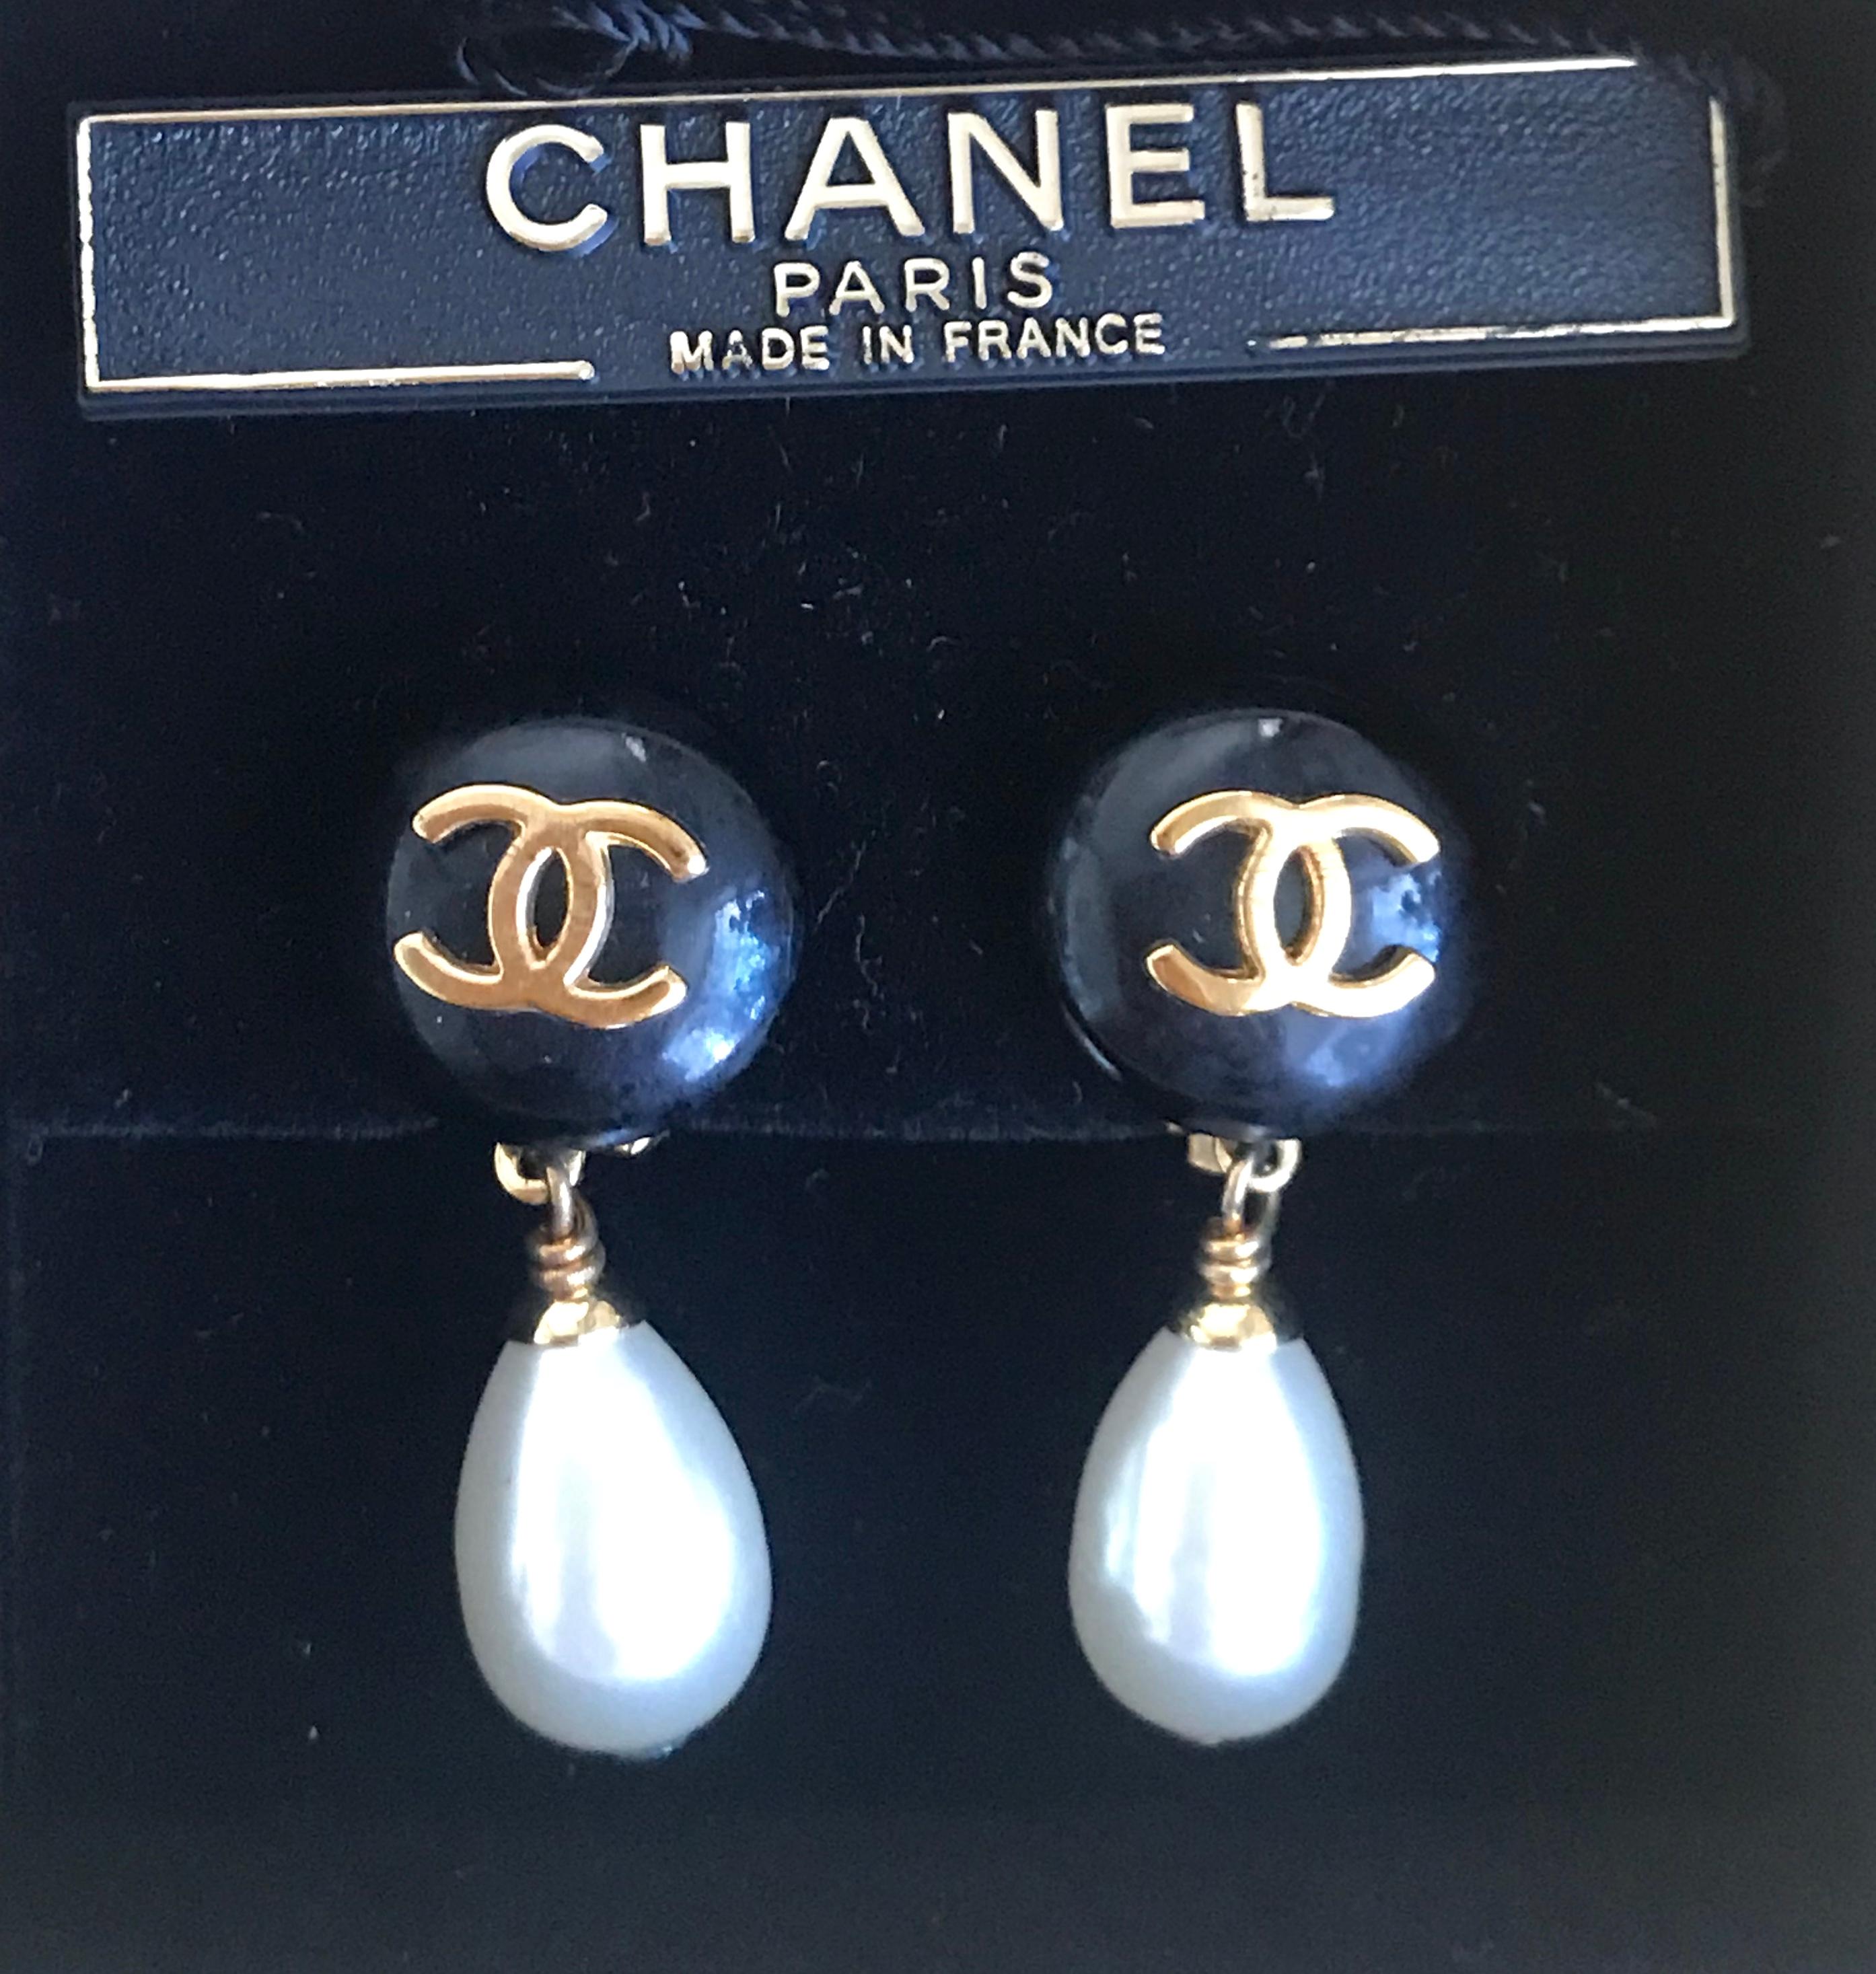 Vintage CHANEL teardrop white faux pearl earrings with black and golden CC mark For Sale 3